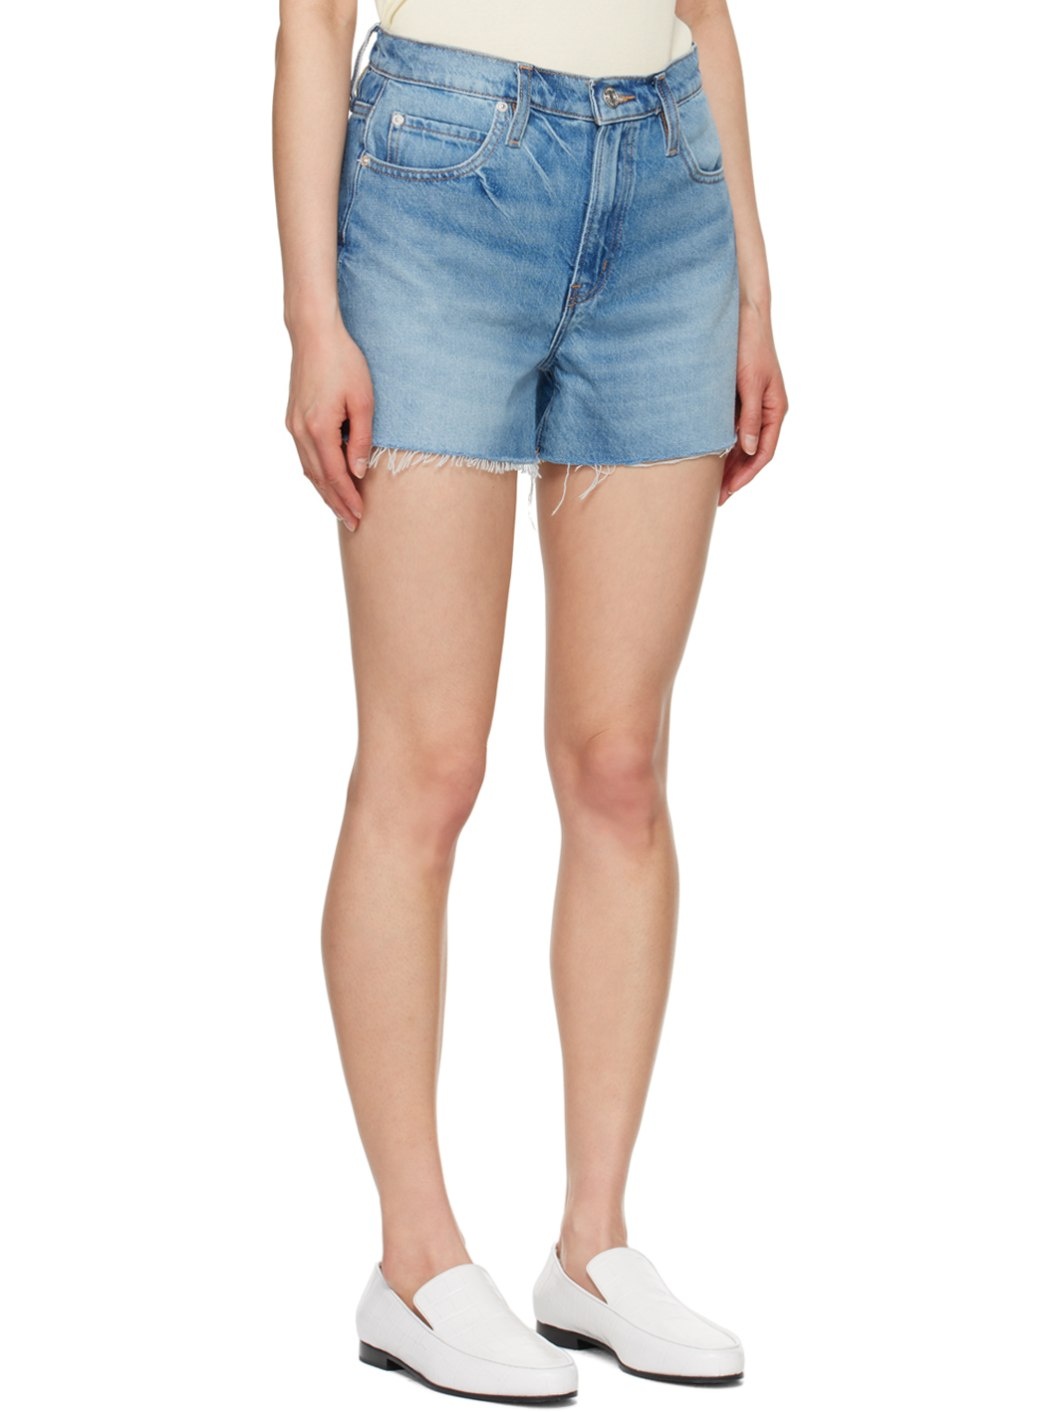 Blue 'The Vintage Relaxed' Denim Shorts - 2